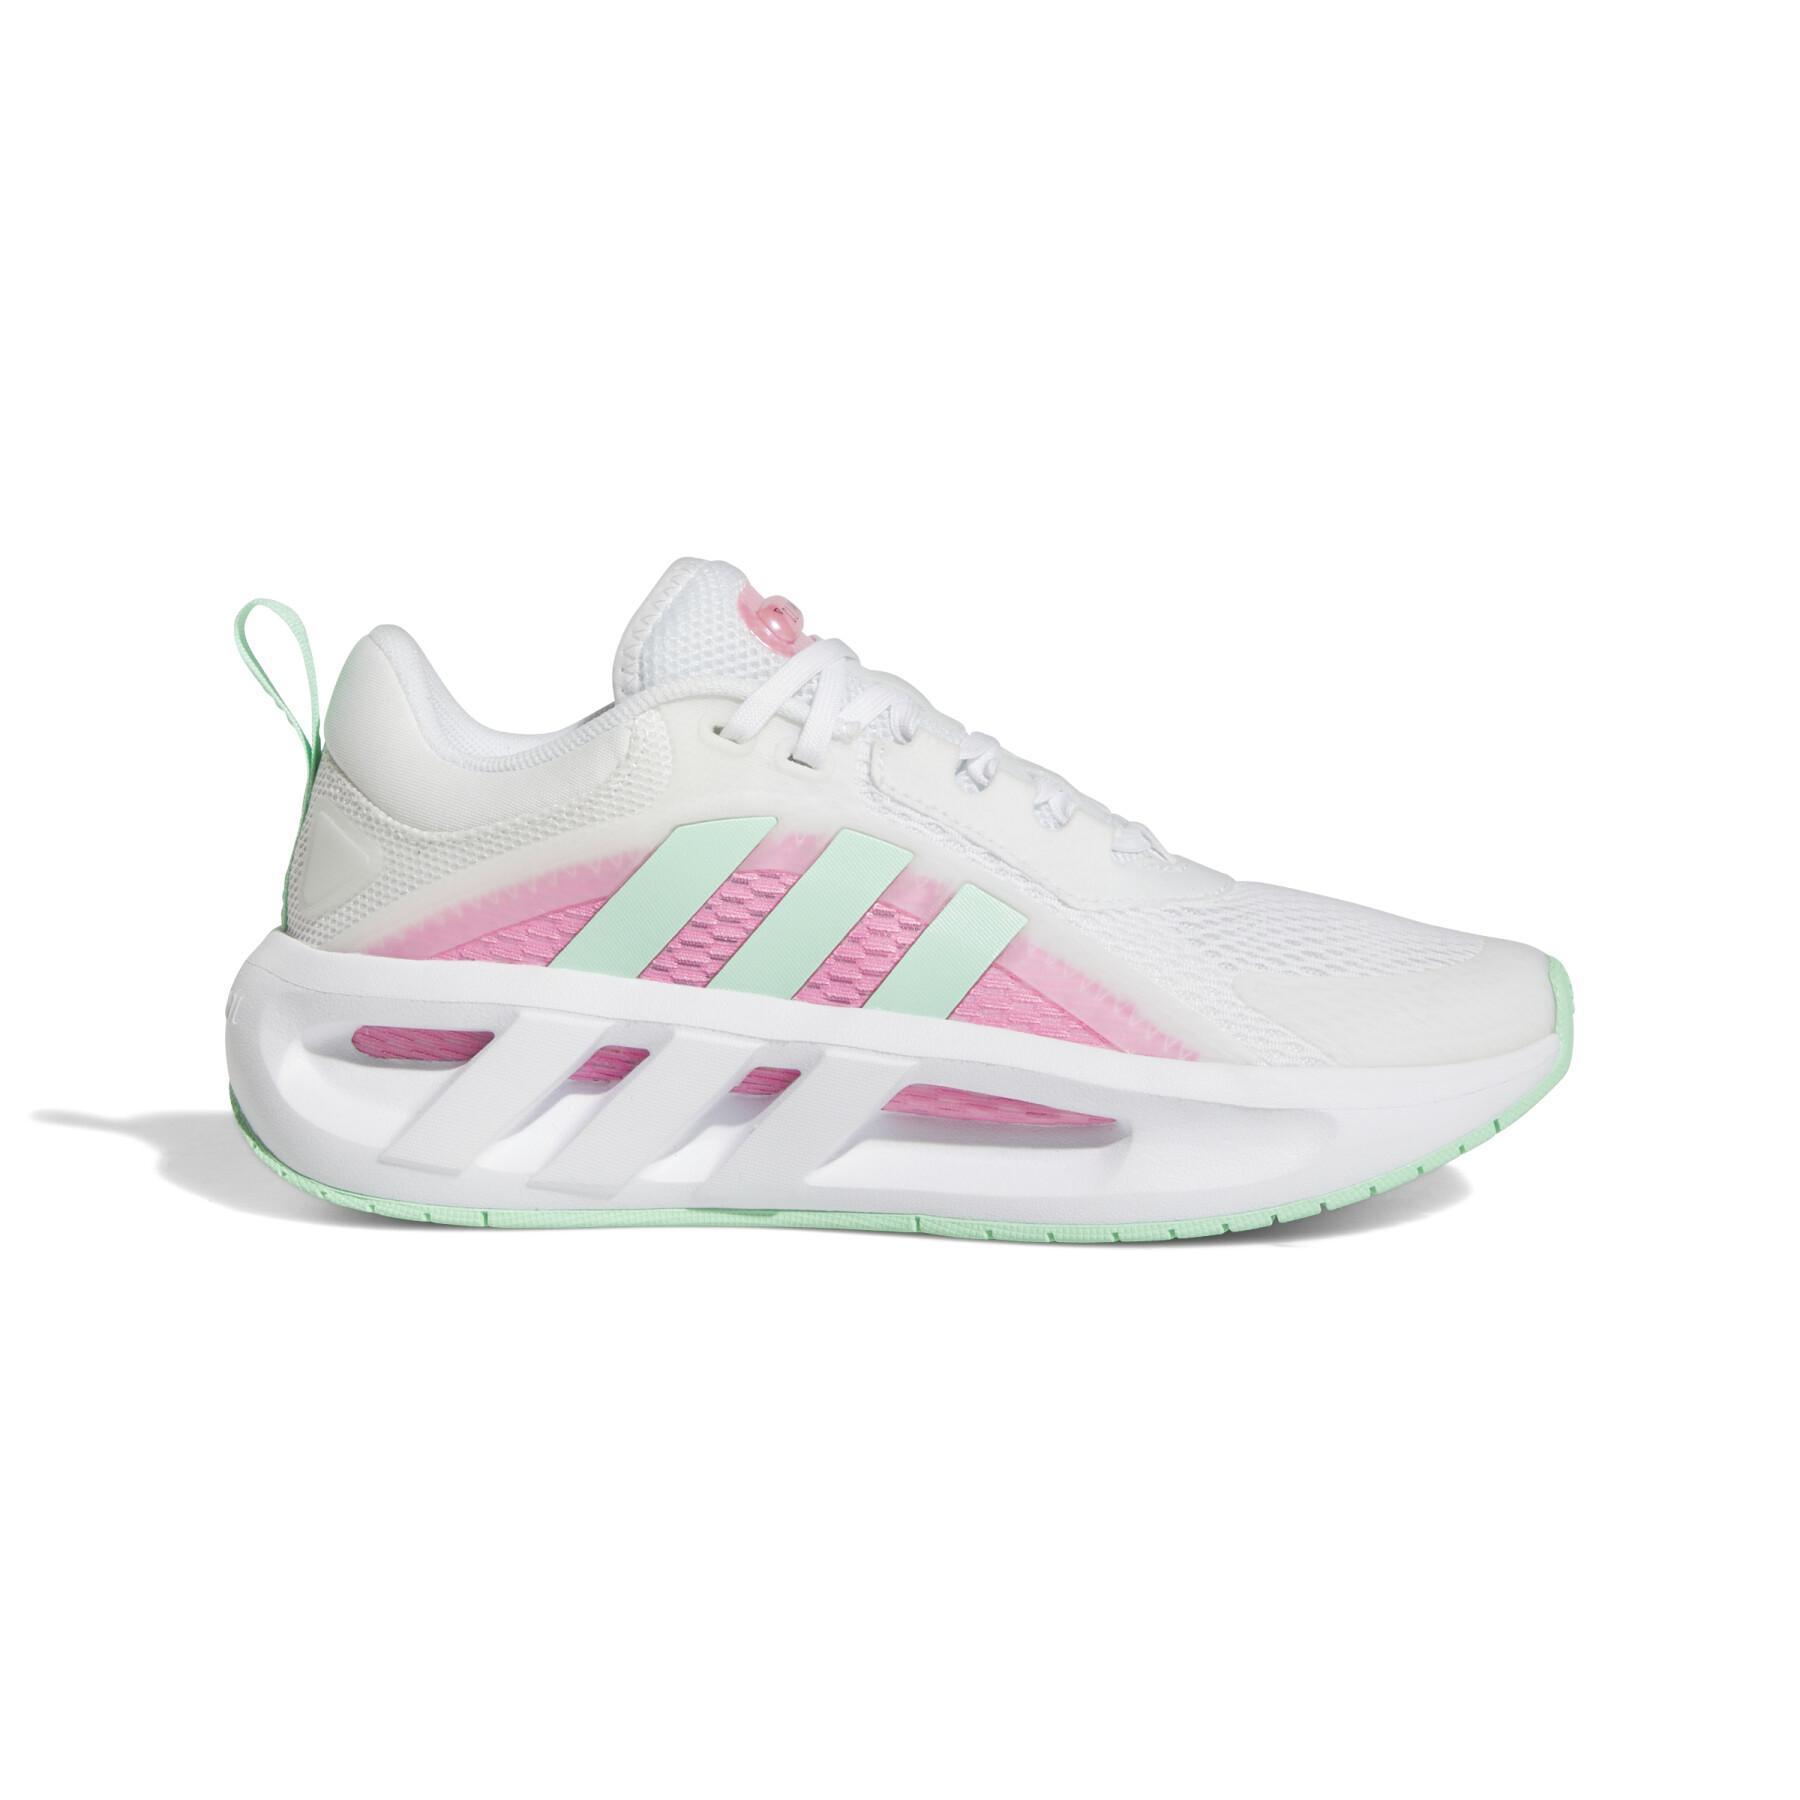 Shoes from running adidas Ventador Climacool - adidas - Shoes Running -